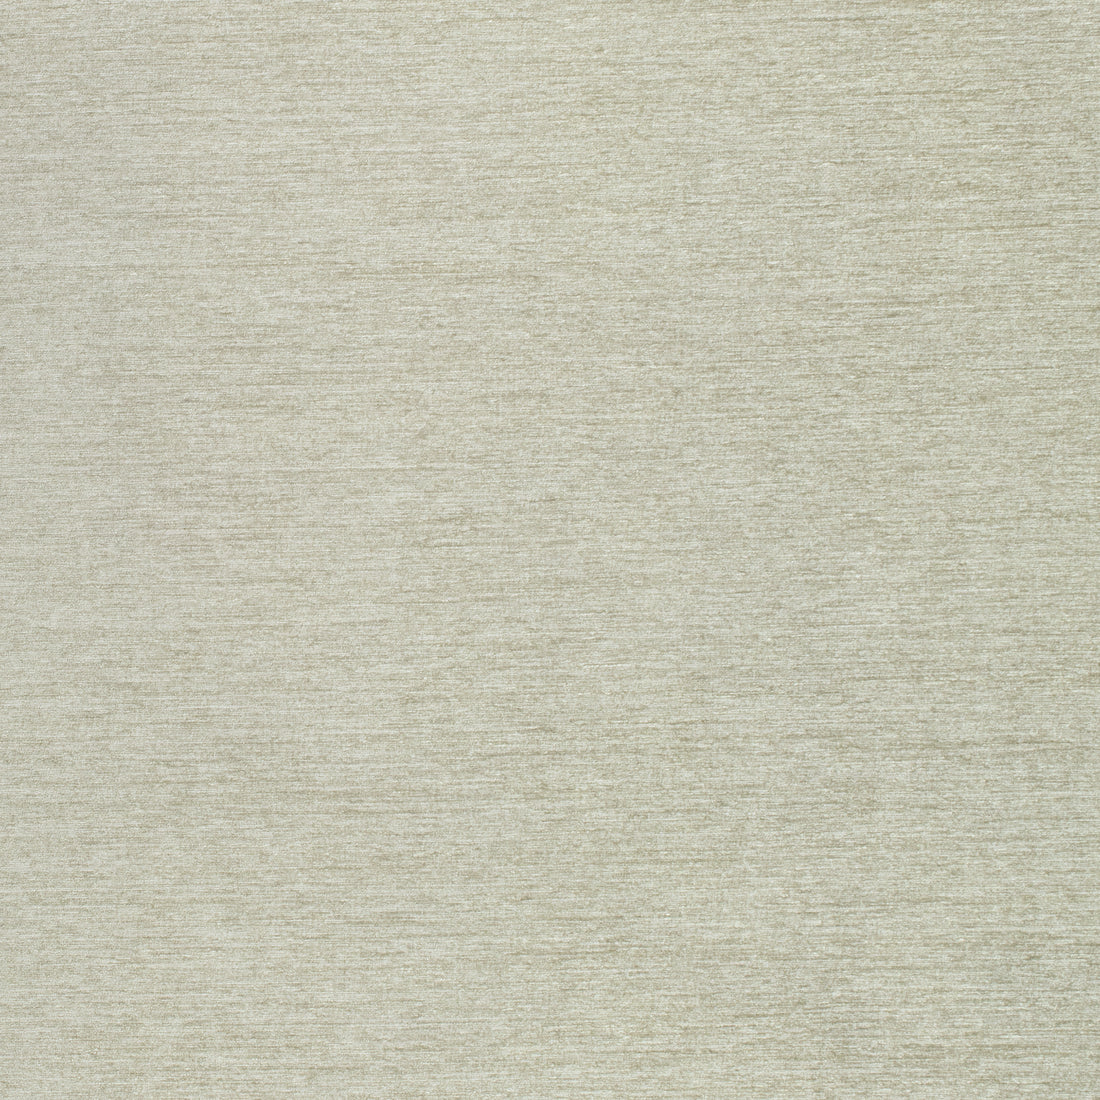 Annalise fabric in grain color - pattern number W80467 - by Thibaut in the Mosaic collection